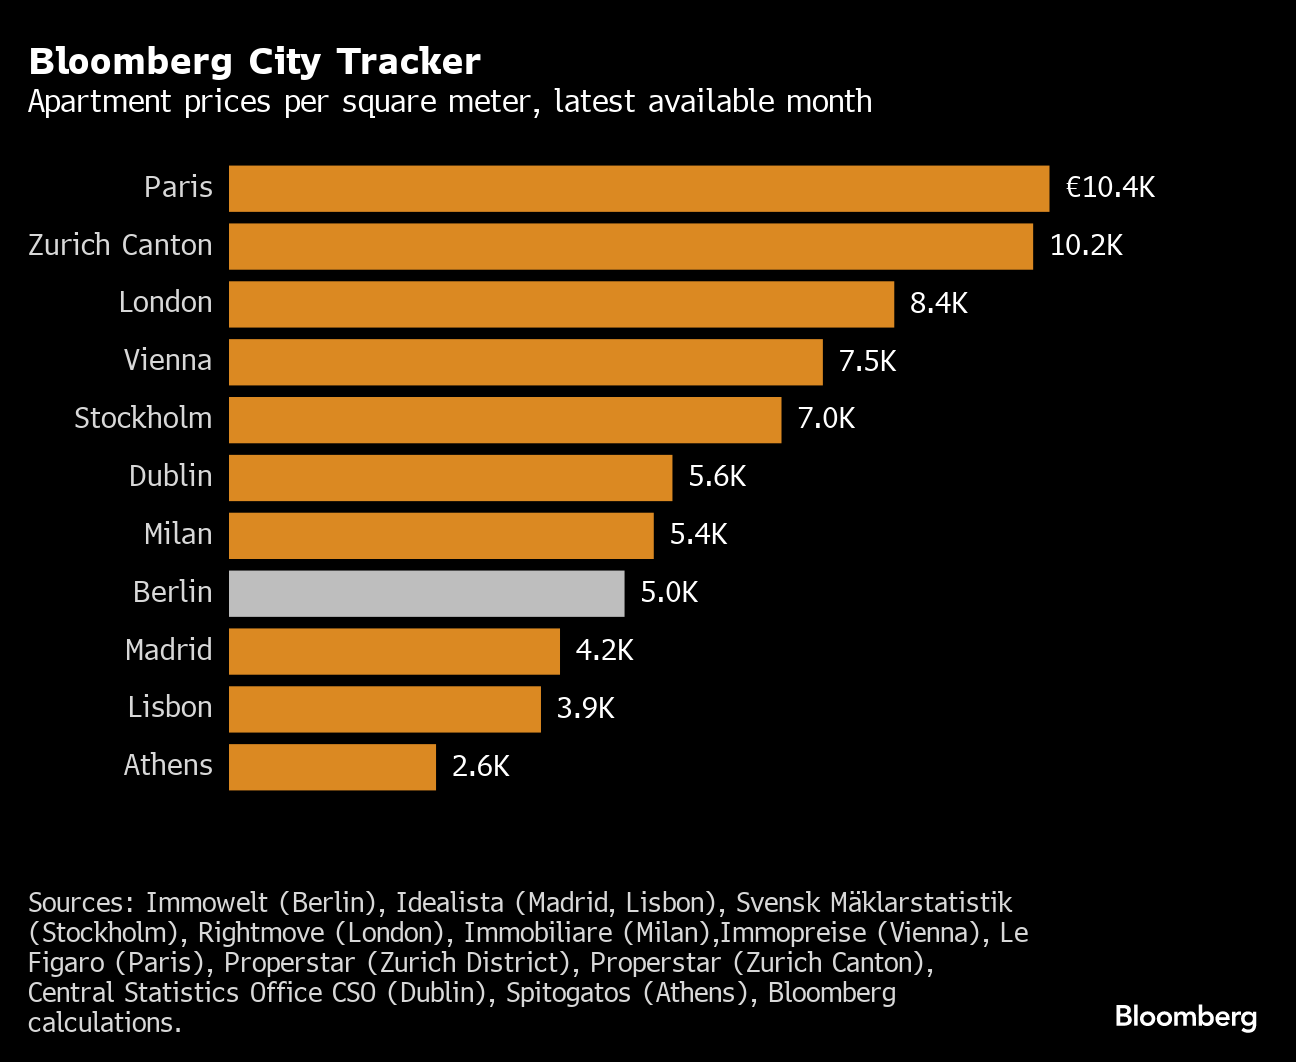 Berlin Housing: The Prospect of Higher Rents Is Luring Investors - Bloomberg